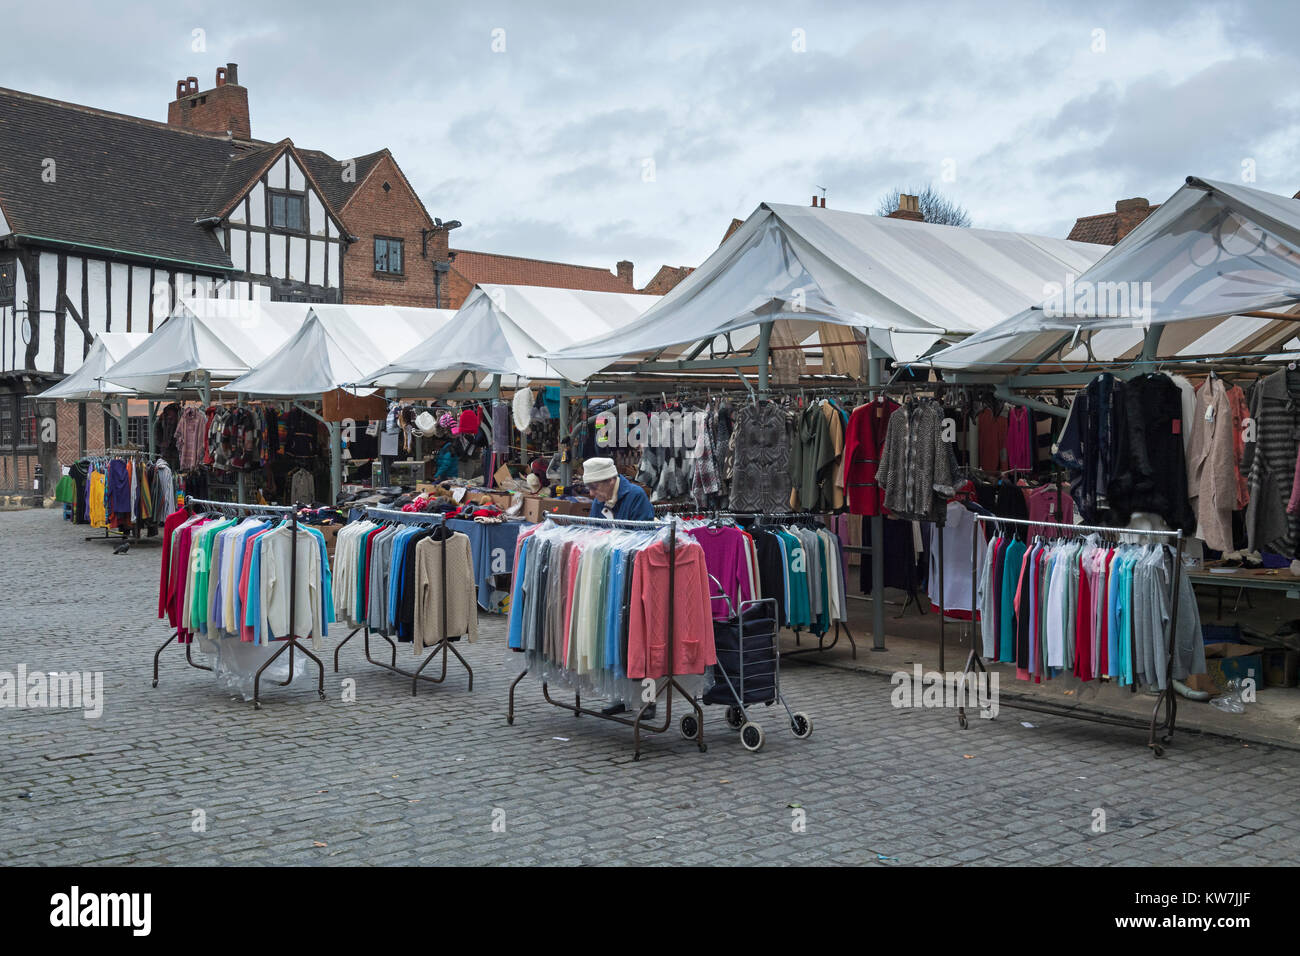 Old lady in historic market place, looks at jumpers hanging on rails by stalls selling clothes - Shambles Market York, North Yorkshire, England, UK. Stock Photo